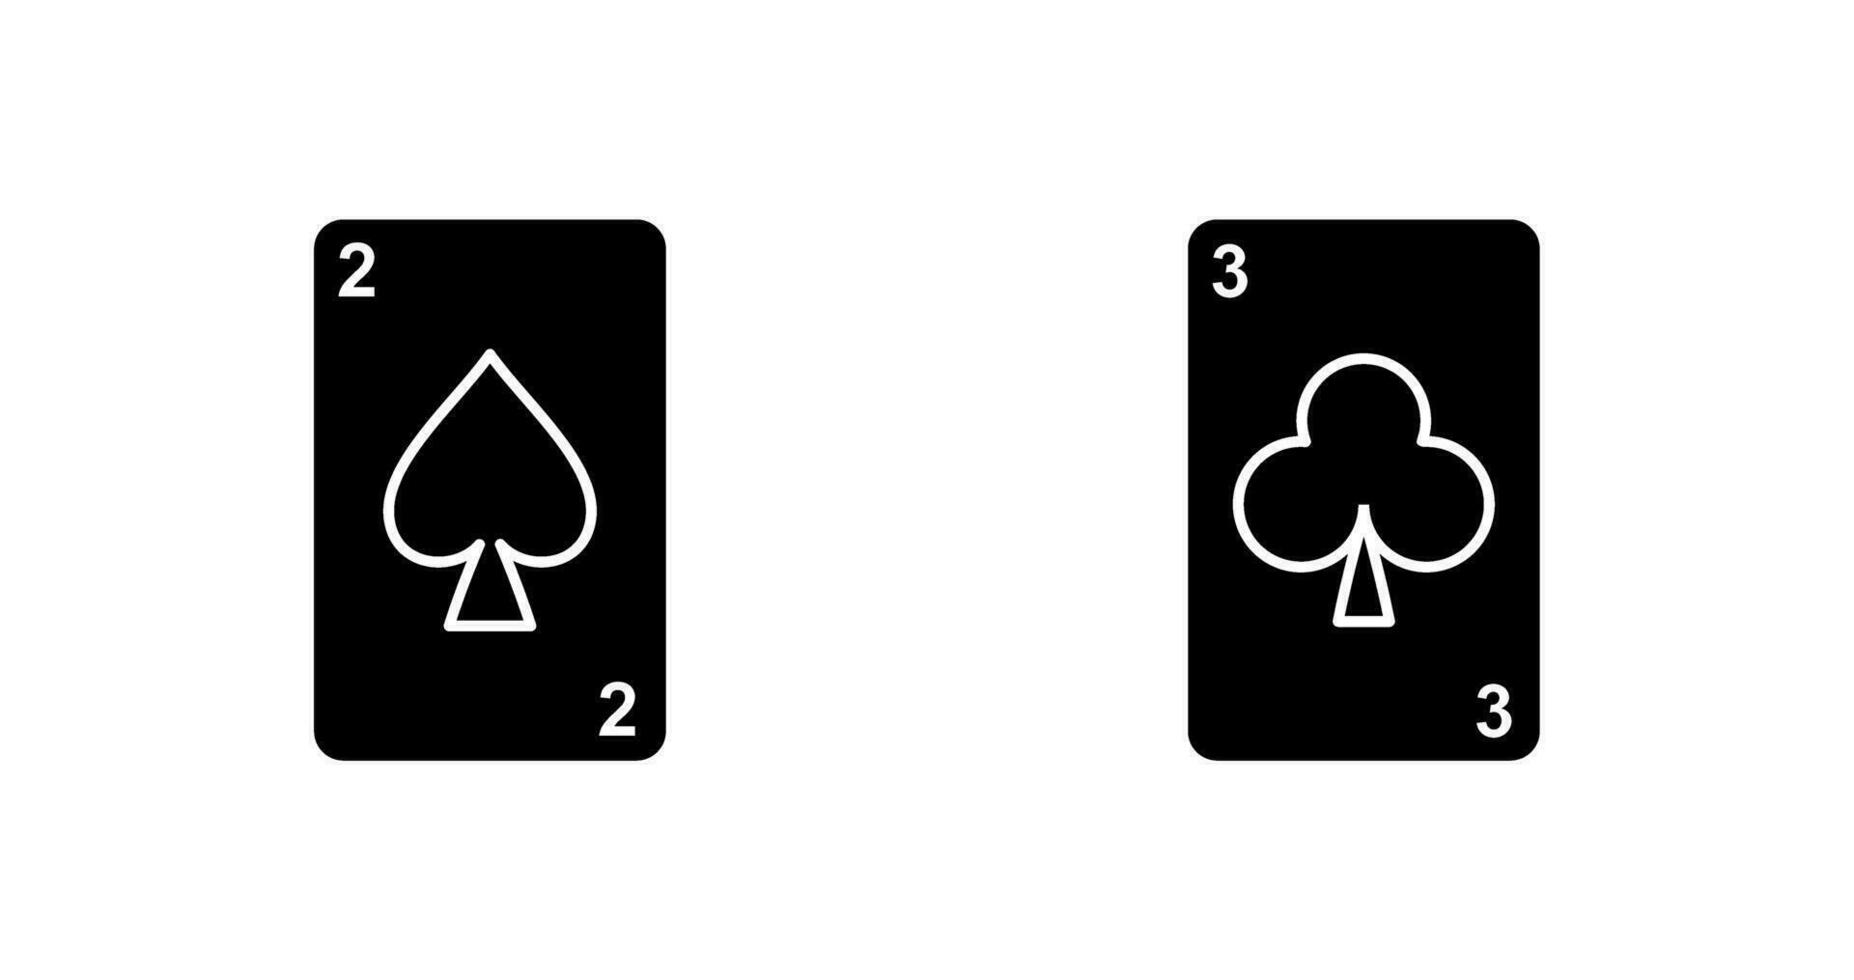 spades cards and clubs card Icon vector